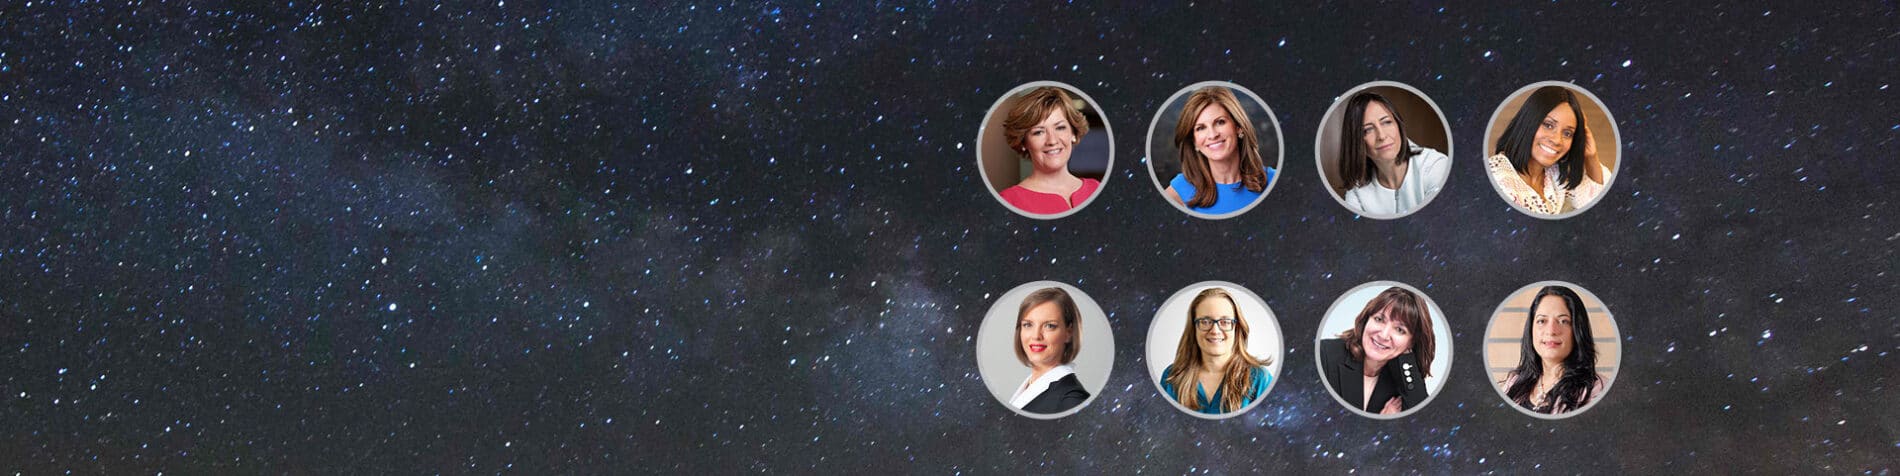 SAP Celebrates International Women’s Day 2019: Eight Leaders, Four Questions